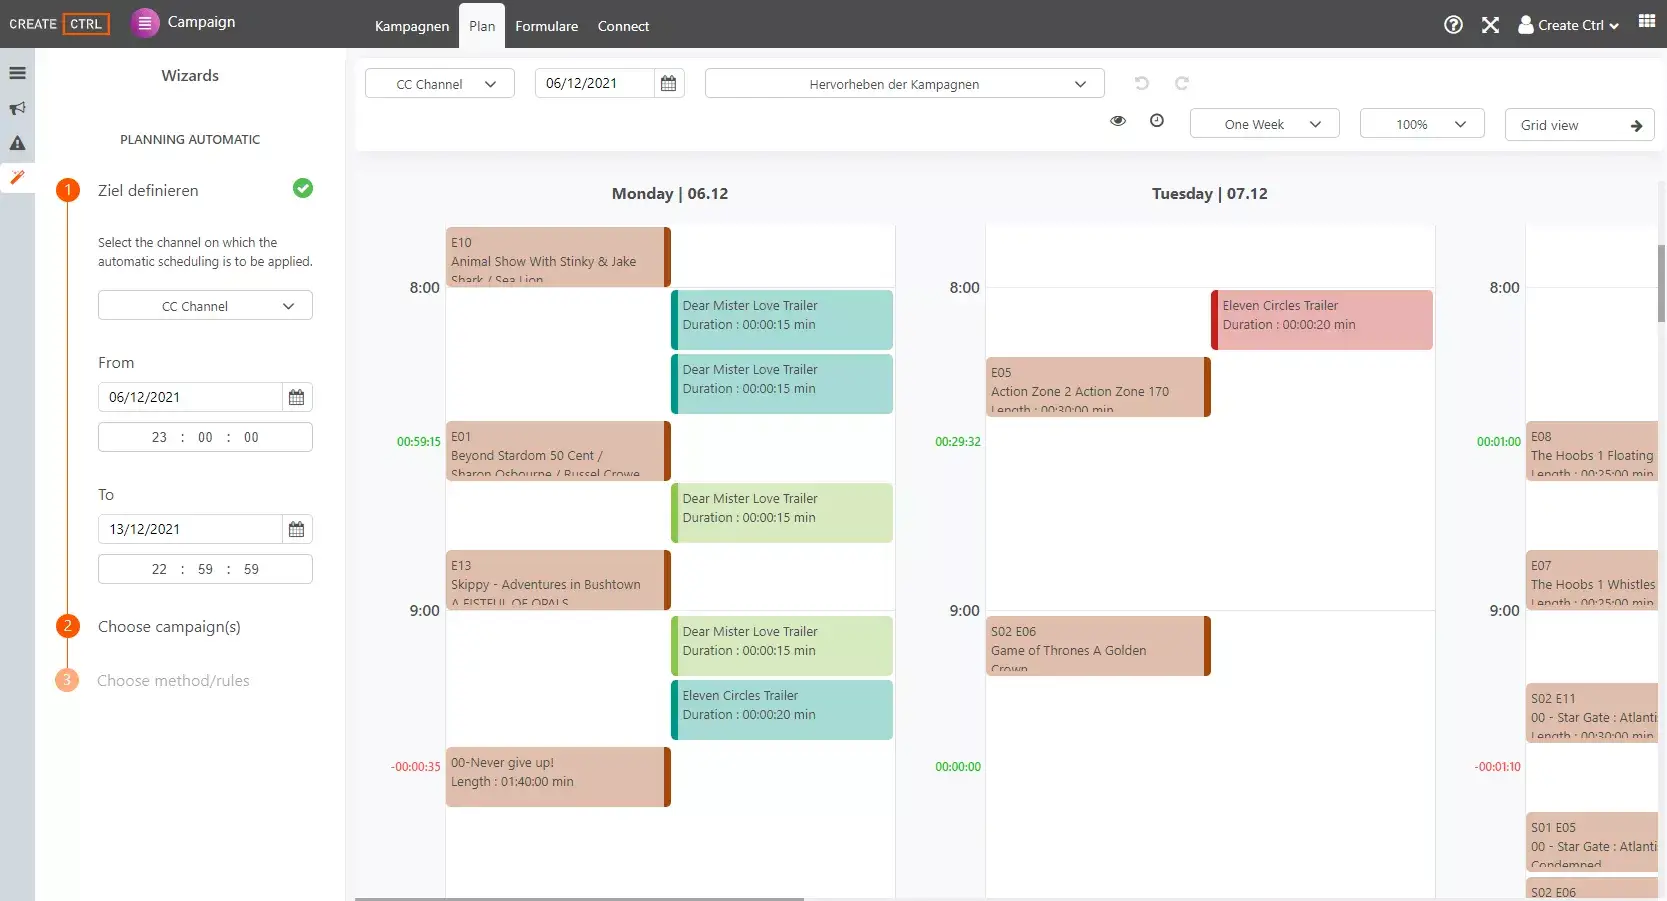 Automated planning of campaigns in just a few steps